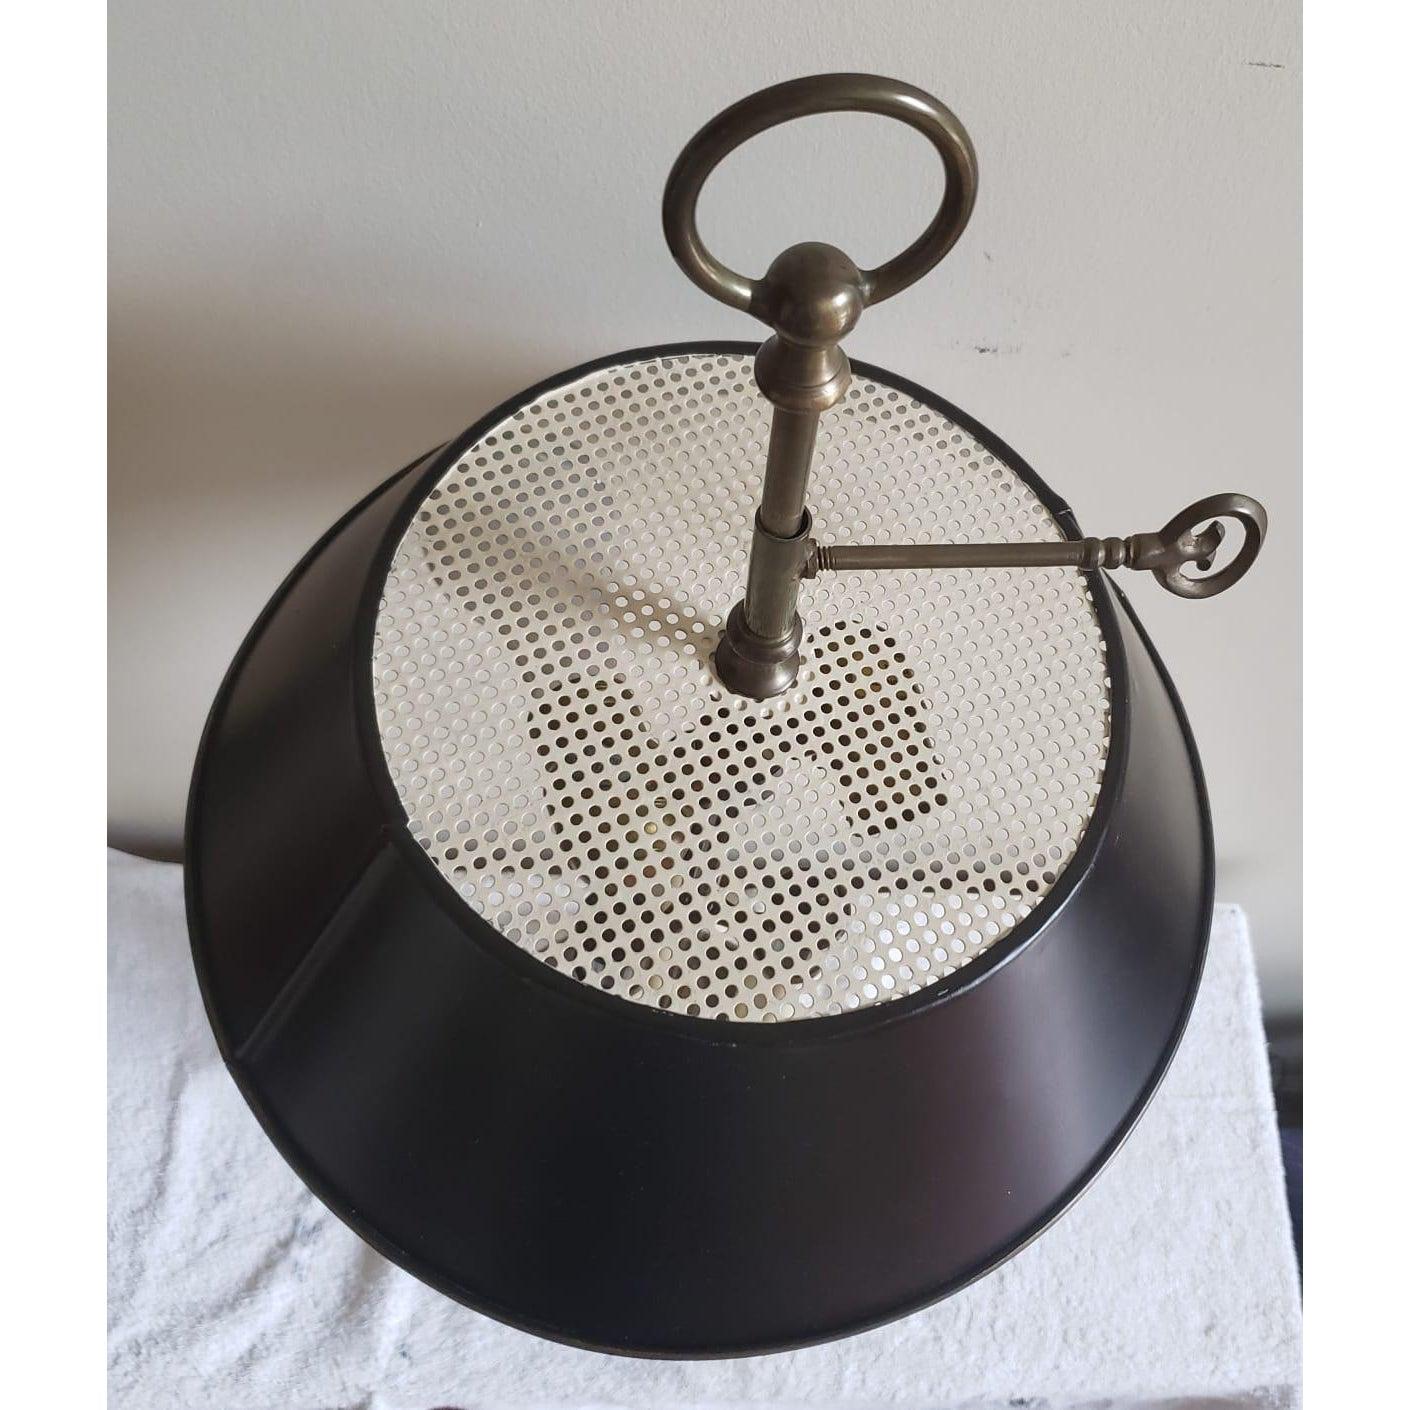 1972 Chapman patinated Metal Bouillotte Lamp with Tole Shade In Good Condition For Sale In Germantown, MD